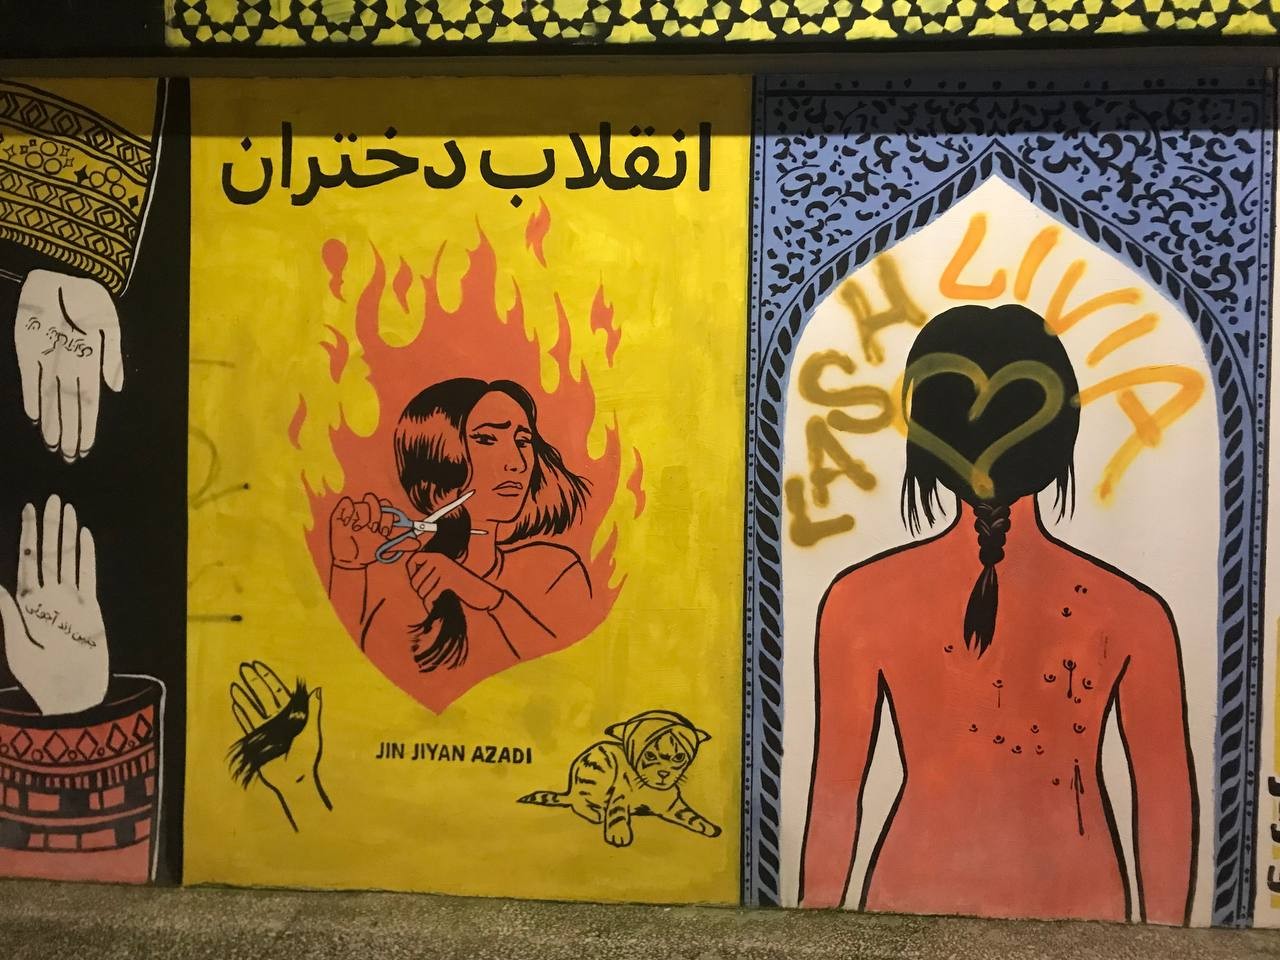 Street art depicts two hands, with one having "Woman Life Freedom" in Persian and the other in Baluchi. In the Middle, it depicts a woman cutting her hair in the fire of the revolt, and "Girls Revolution" on top is written in Persian, and "Jin Jiyan <br />Azadi" in Kurdish below it. On the right depicts a woman's back with anti-riot pallet wounds.